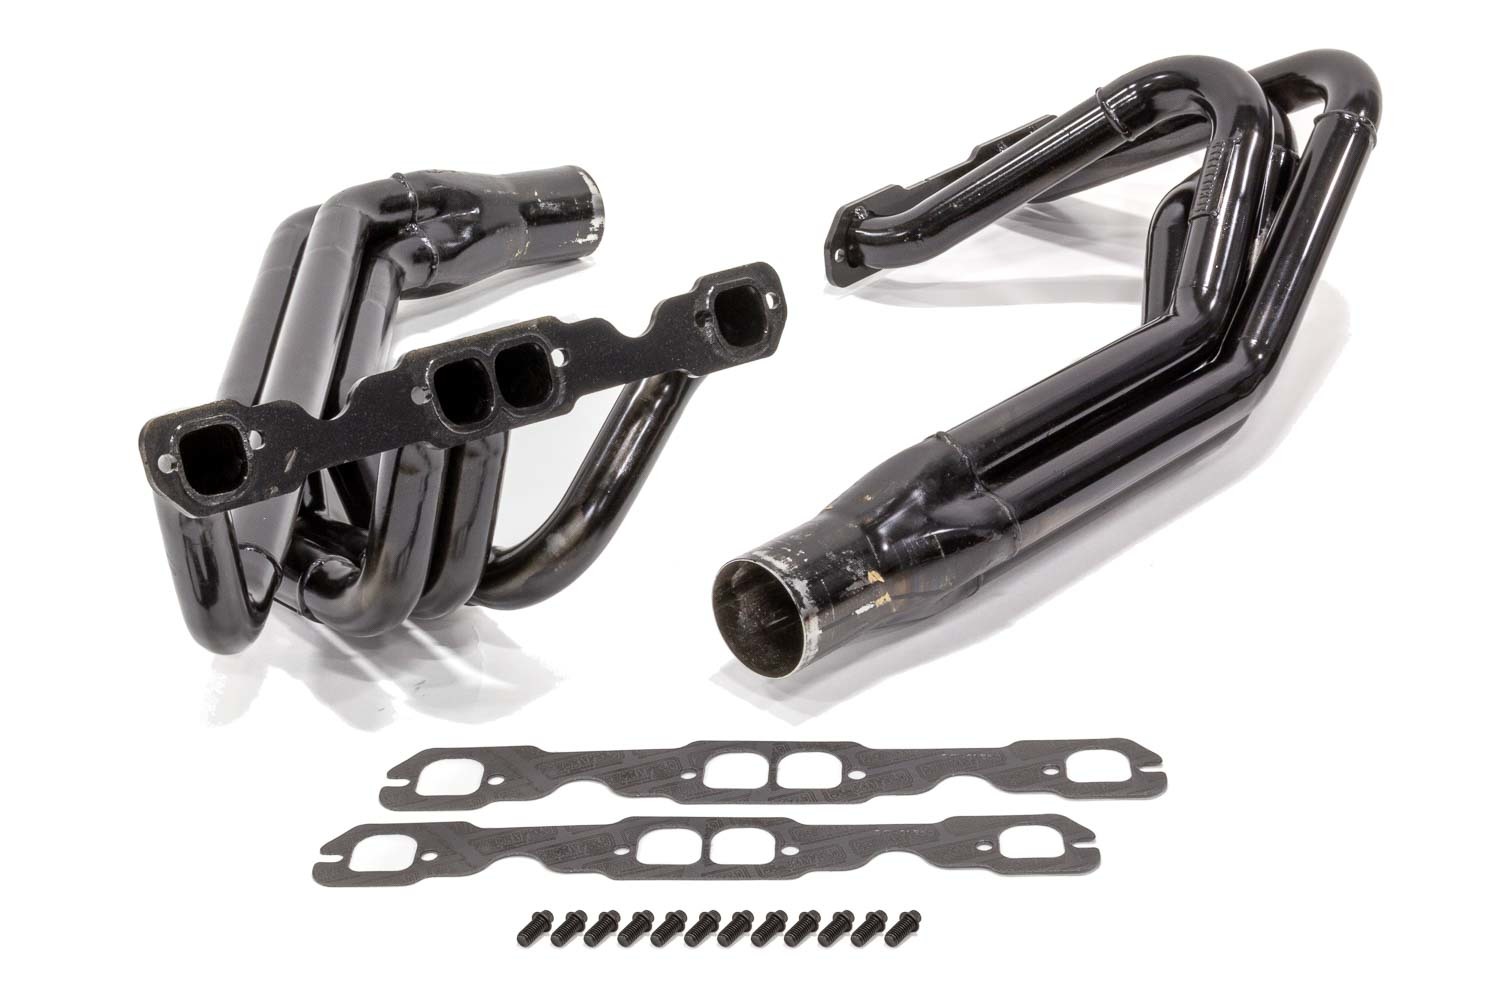 Schoenfeld Headers 1155LVCM-3 - Headers, Dirt Late Model, 1-5/8 to 1-3/4 in Primary, 3 in Collector, Steel, Black Paint, Small Block Chevy, Kit